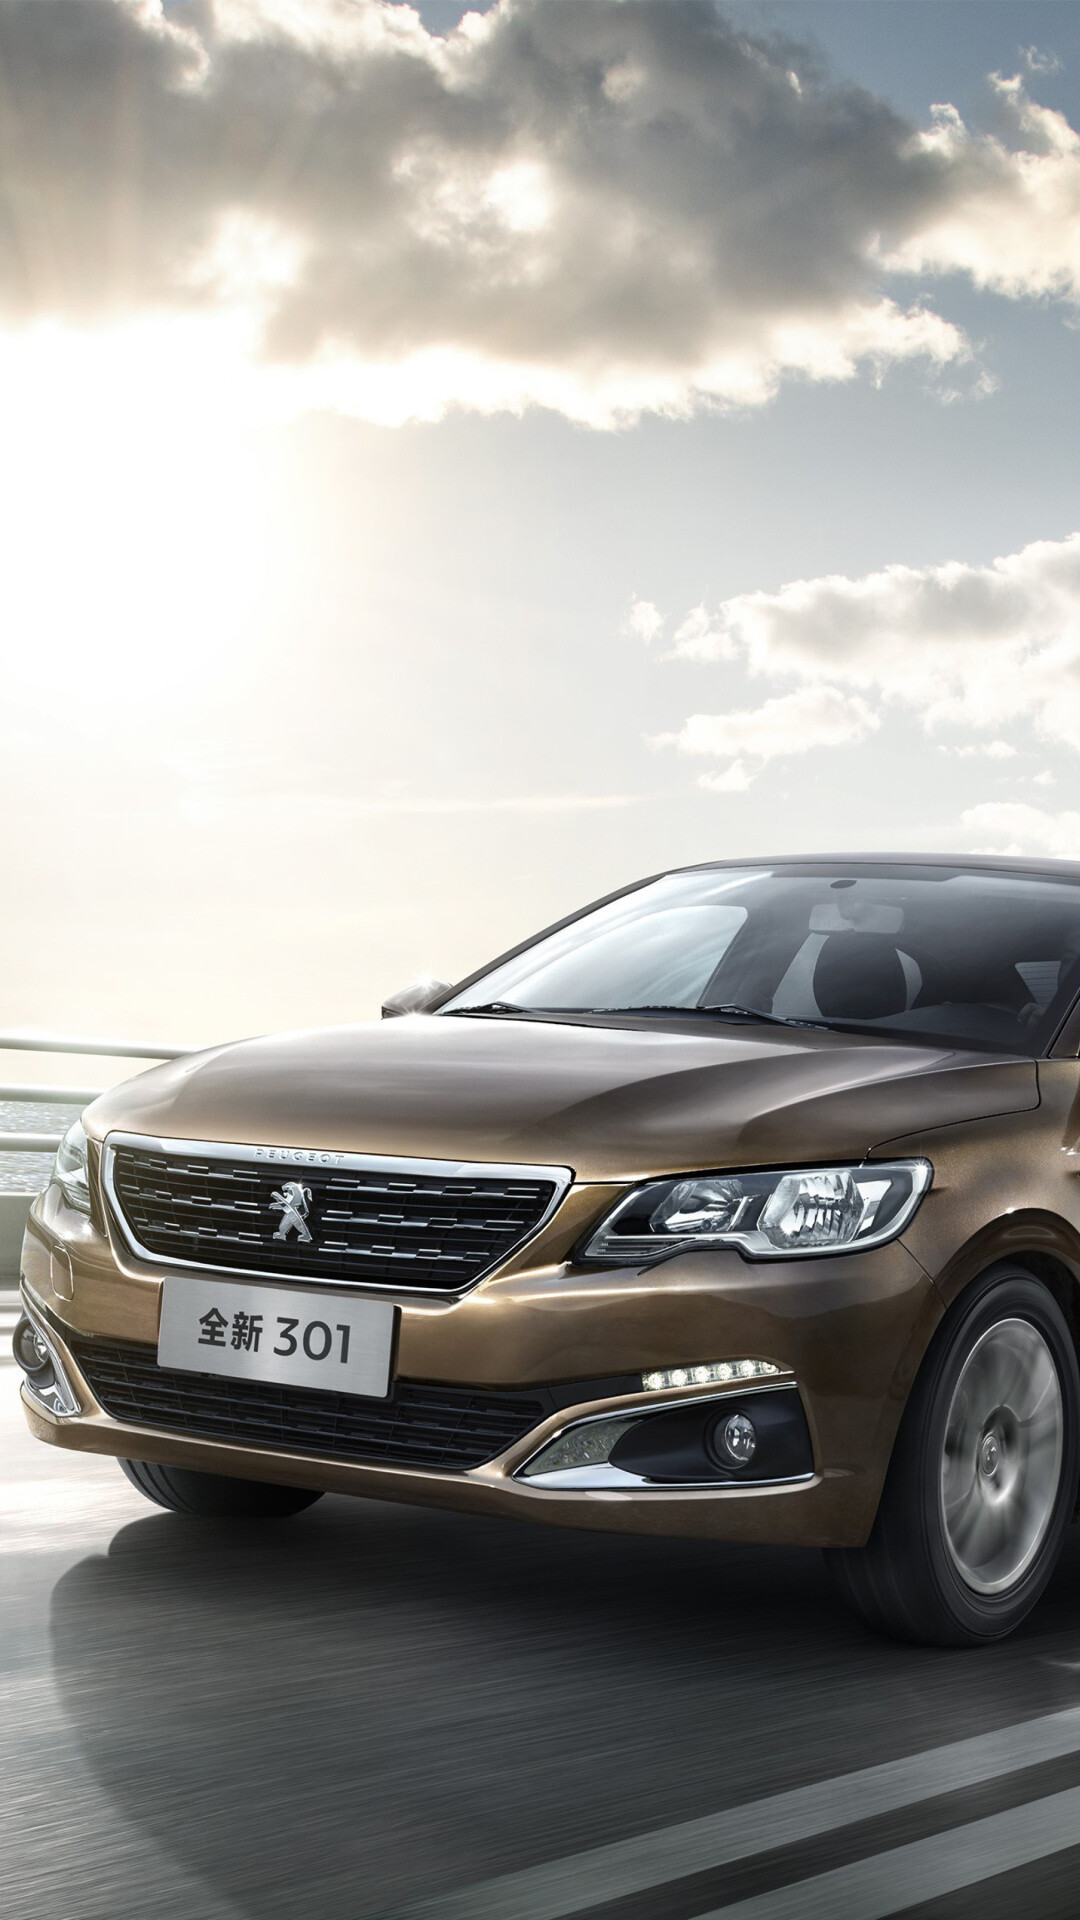 Peugeot: Model 301, A French brand of automobiles owned by Stellantis. 1080x1920 Full HD Background.